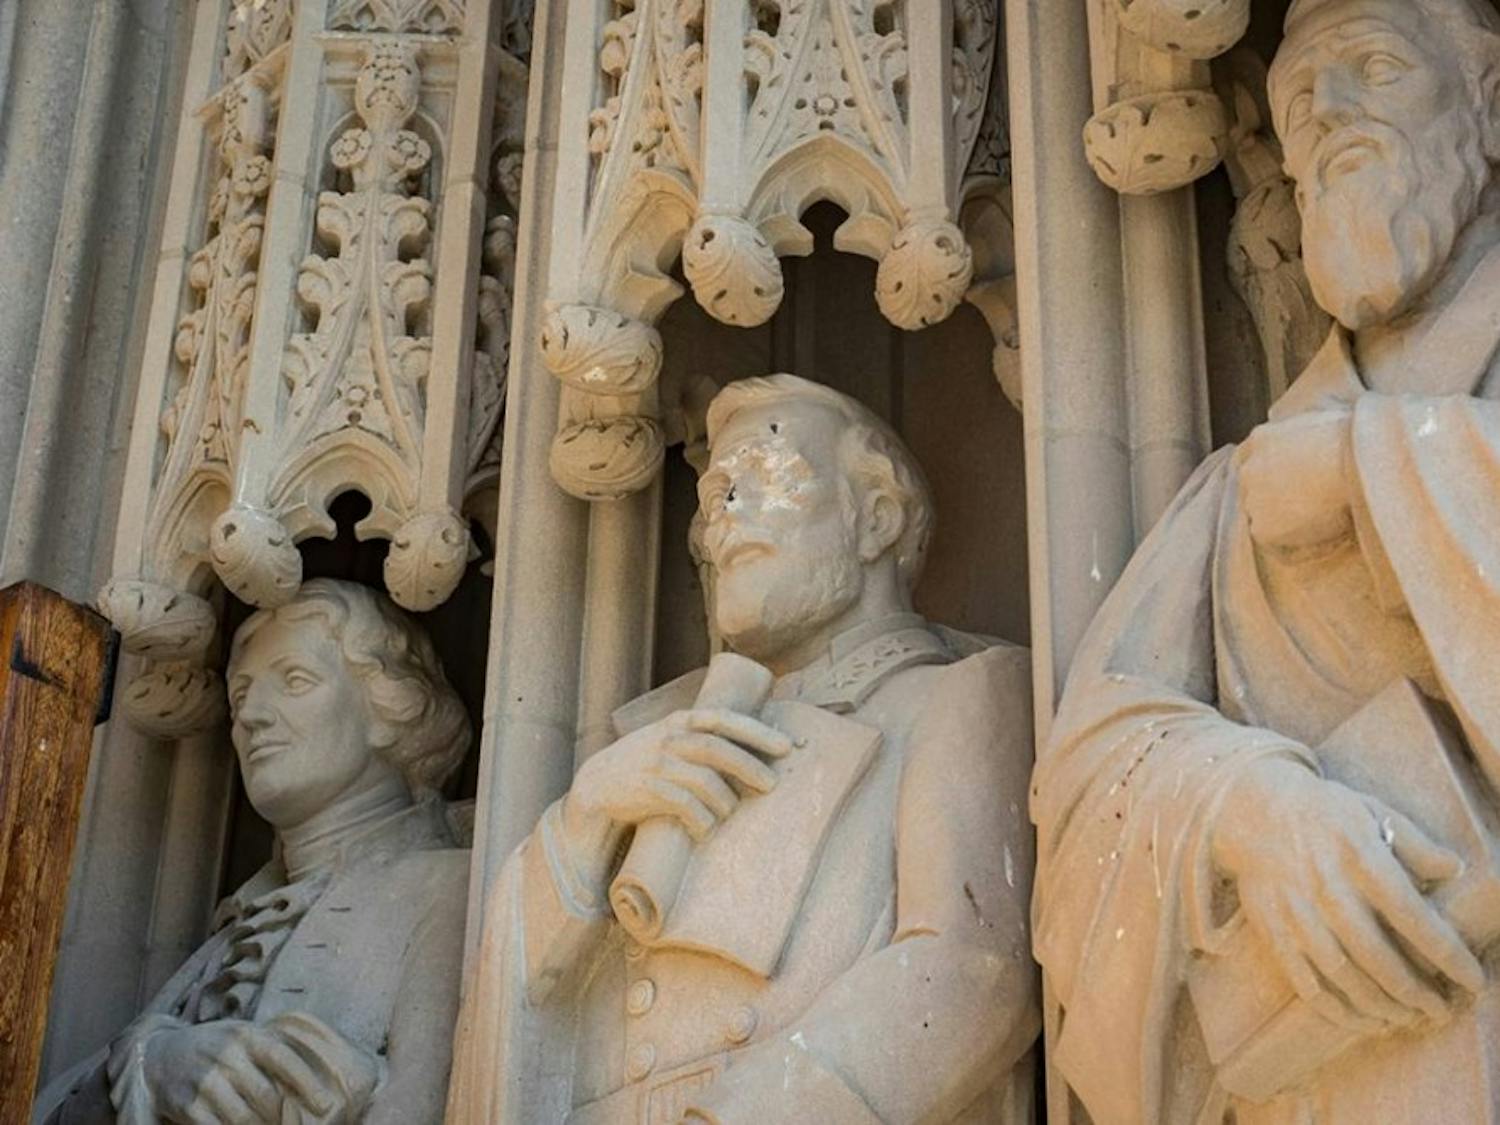 A statue of Confederate Gen. Robert E. Lee at Duke Chapel was recently removed after being defaced Thursday morning. Courtesy of William Snead/Duke Photography